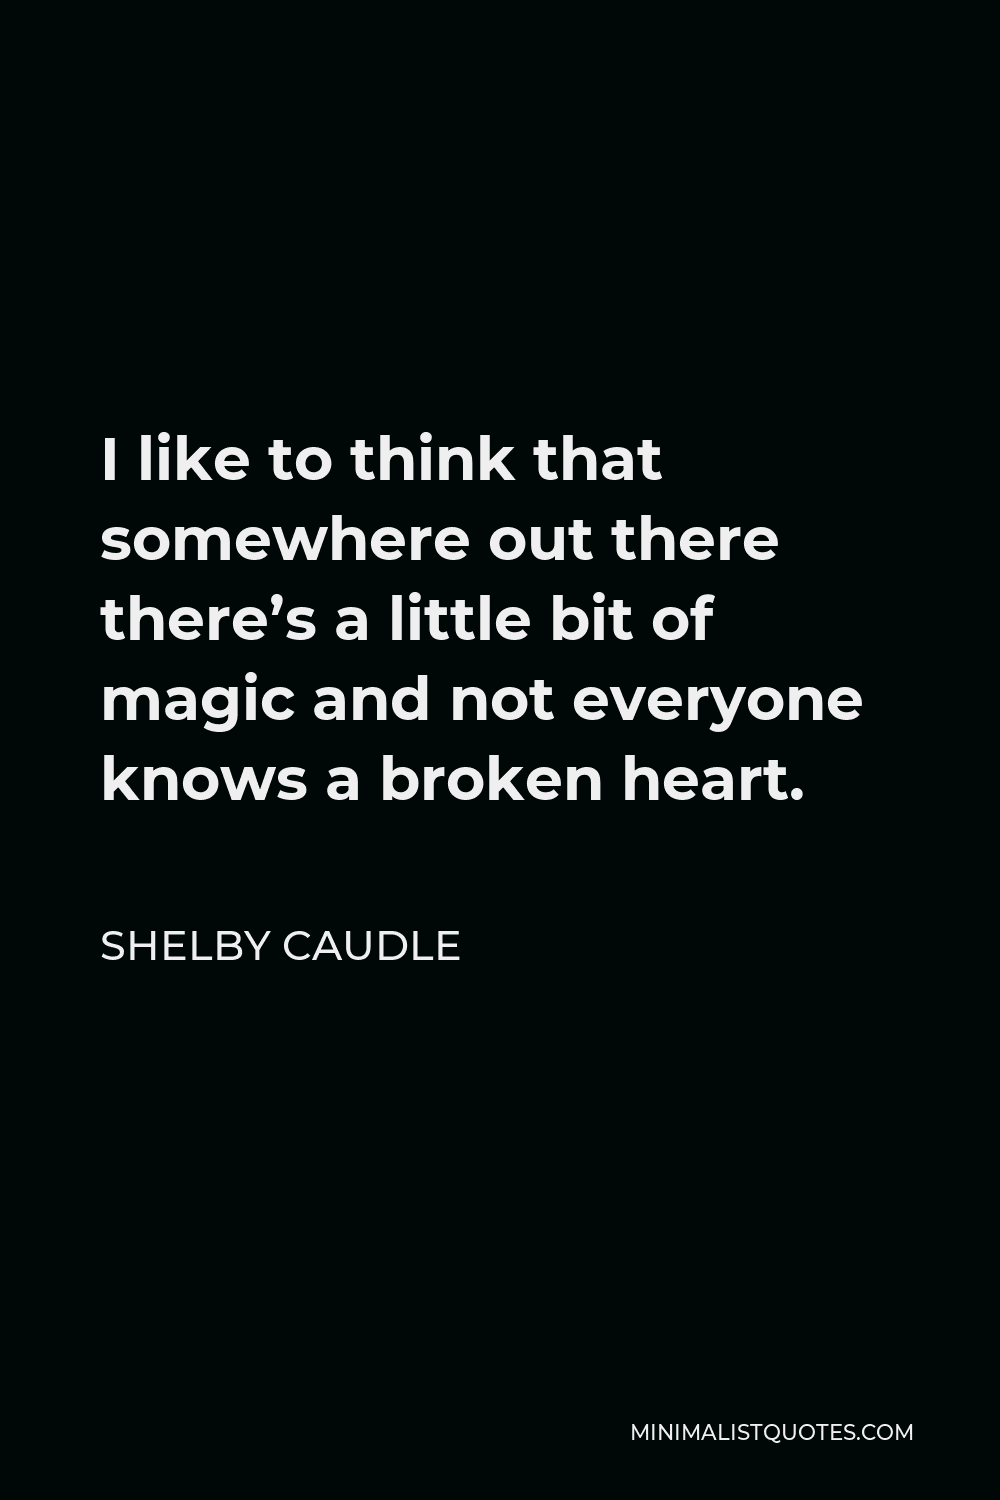 Shelby Caudle Quote - I like to think that somewhere out there there’s a little bit of magic and not everyone knows a broken heart.